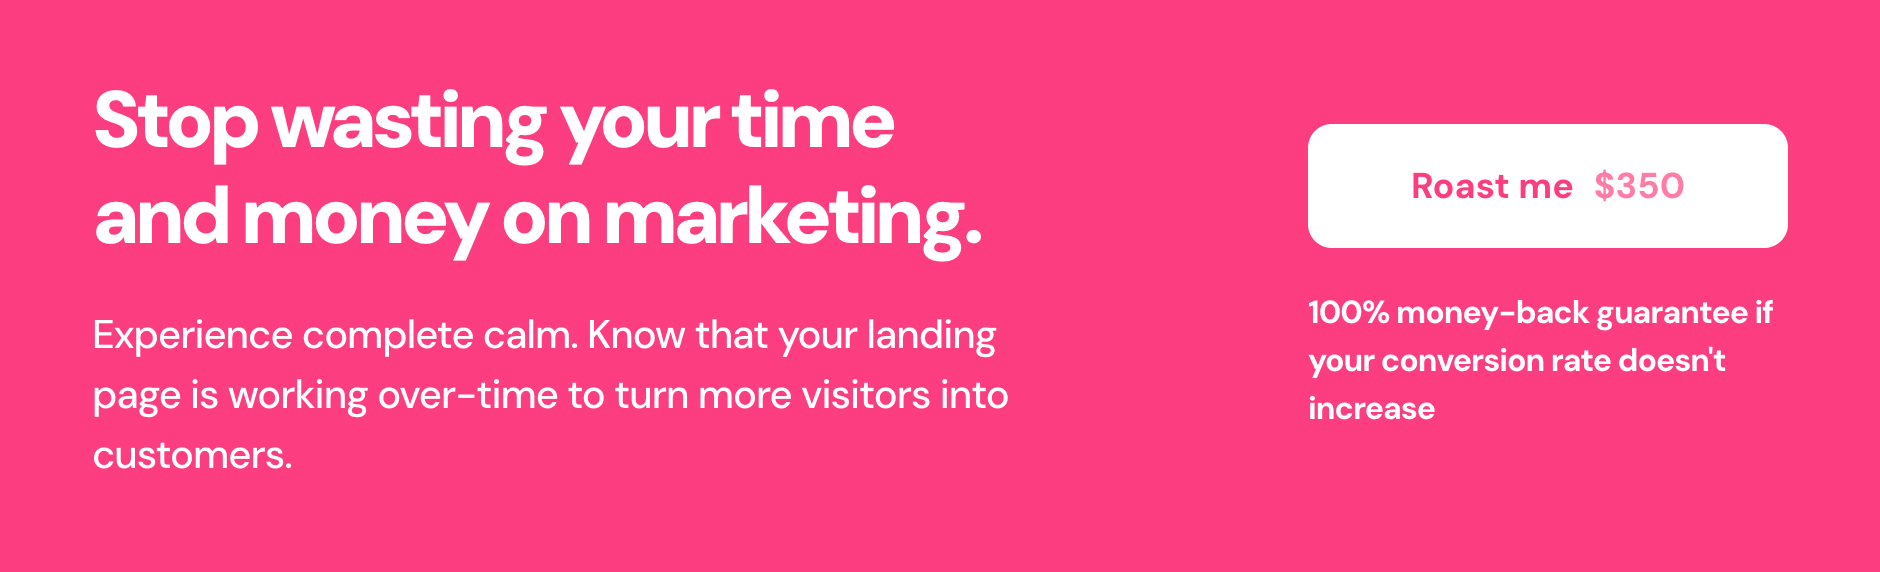 Stop wasting your time and money on marketing. Experience complete calm. Know that your landing page is working over-time to turn more visitors into customers. Roast me for $350. 100% money-back guarantee if your conversion rate doesn't increase